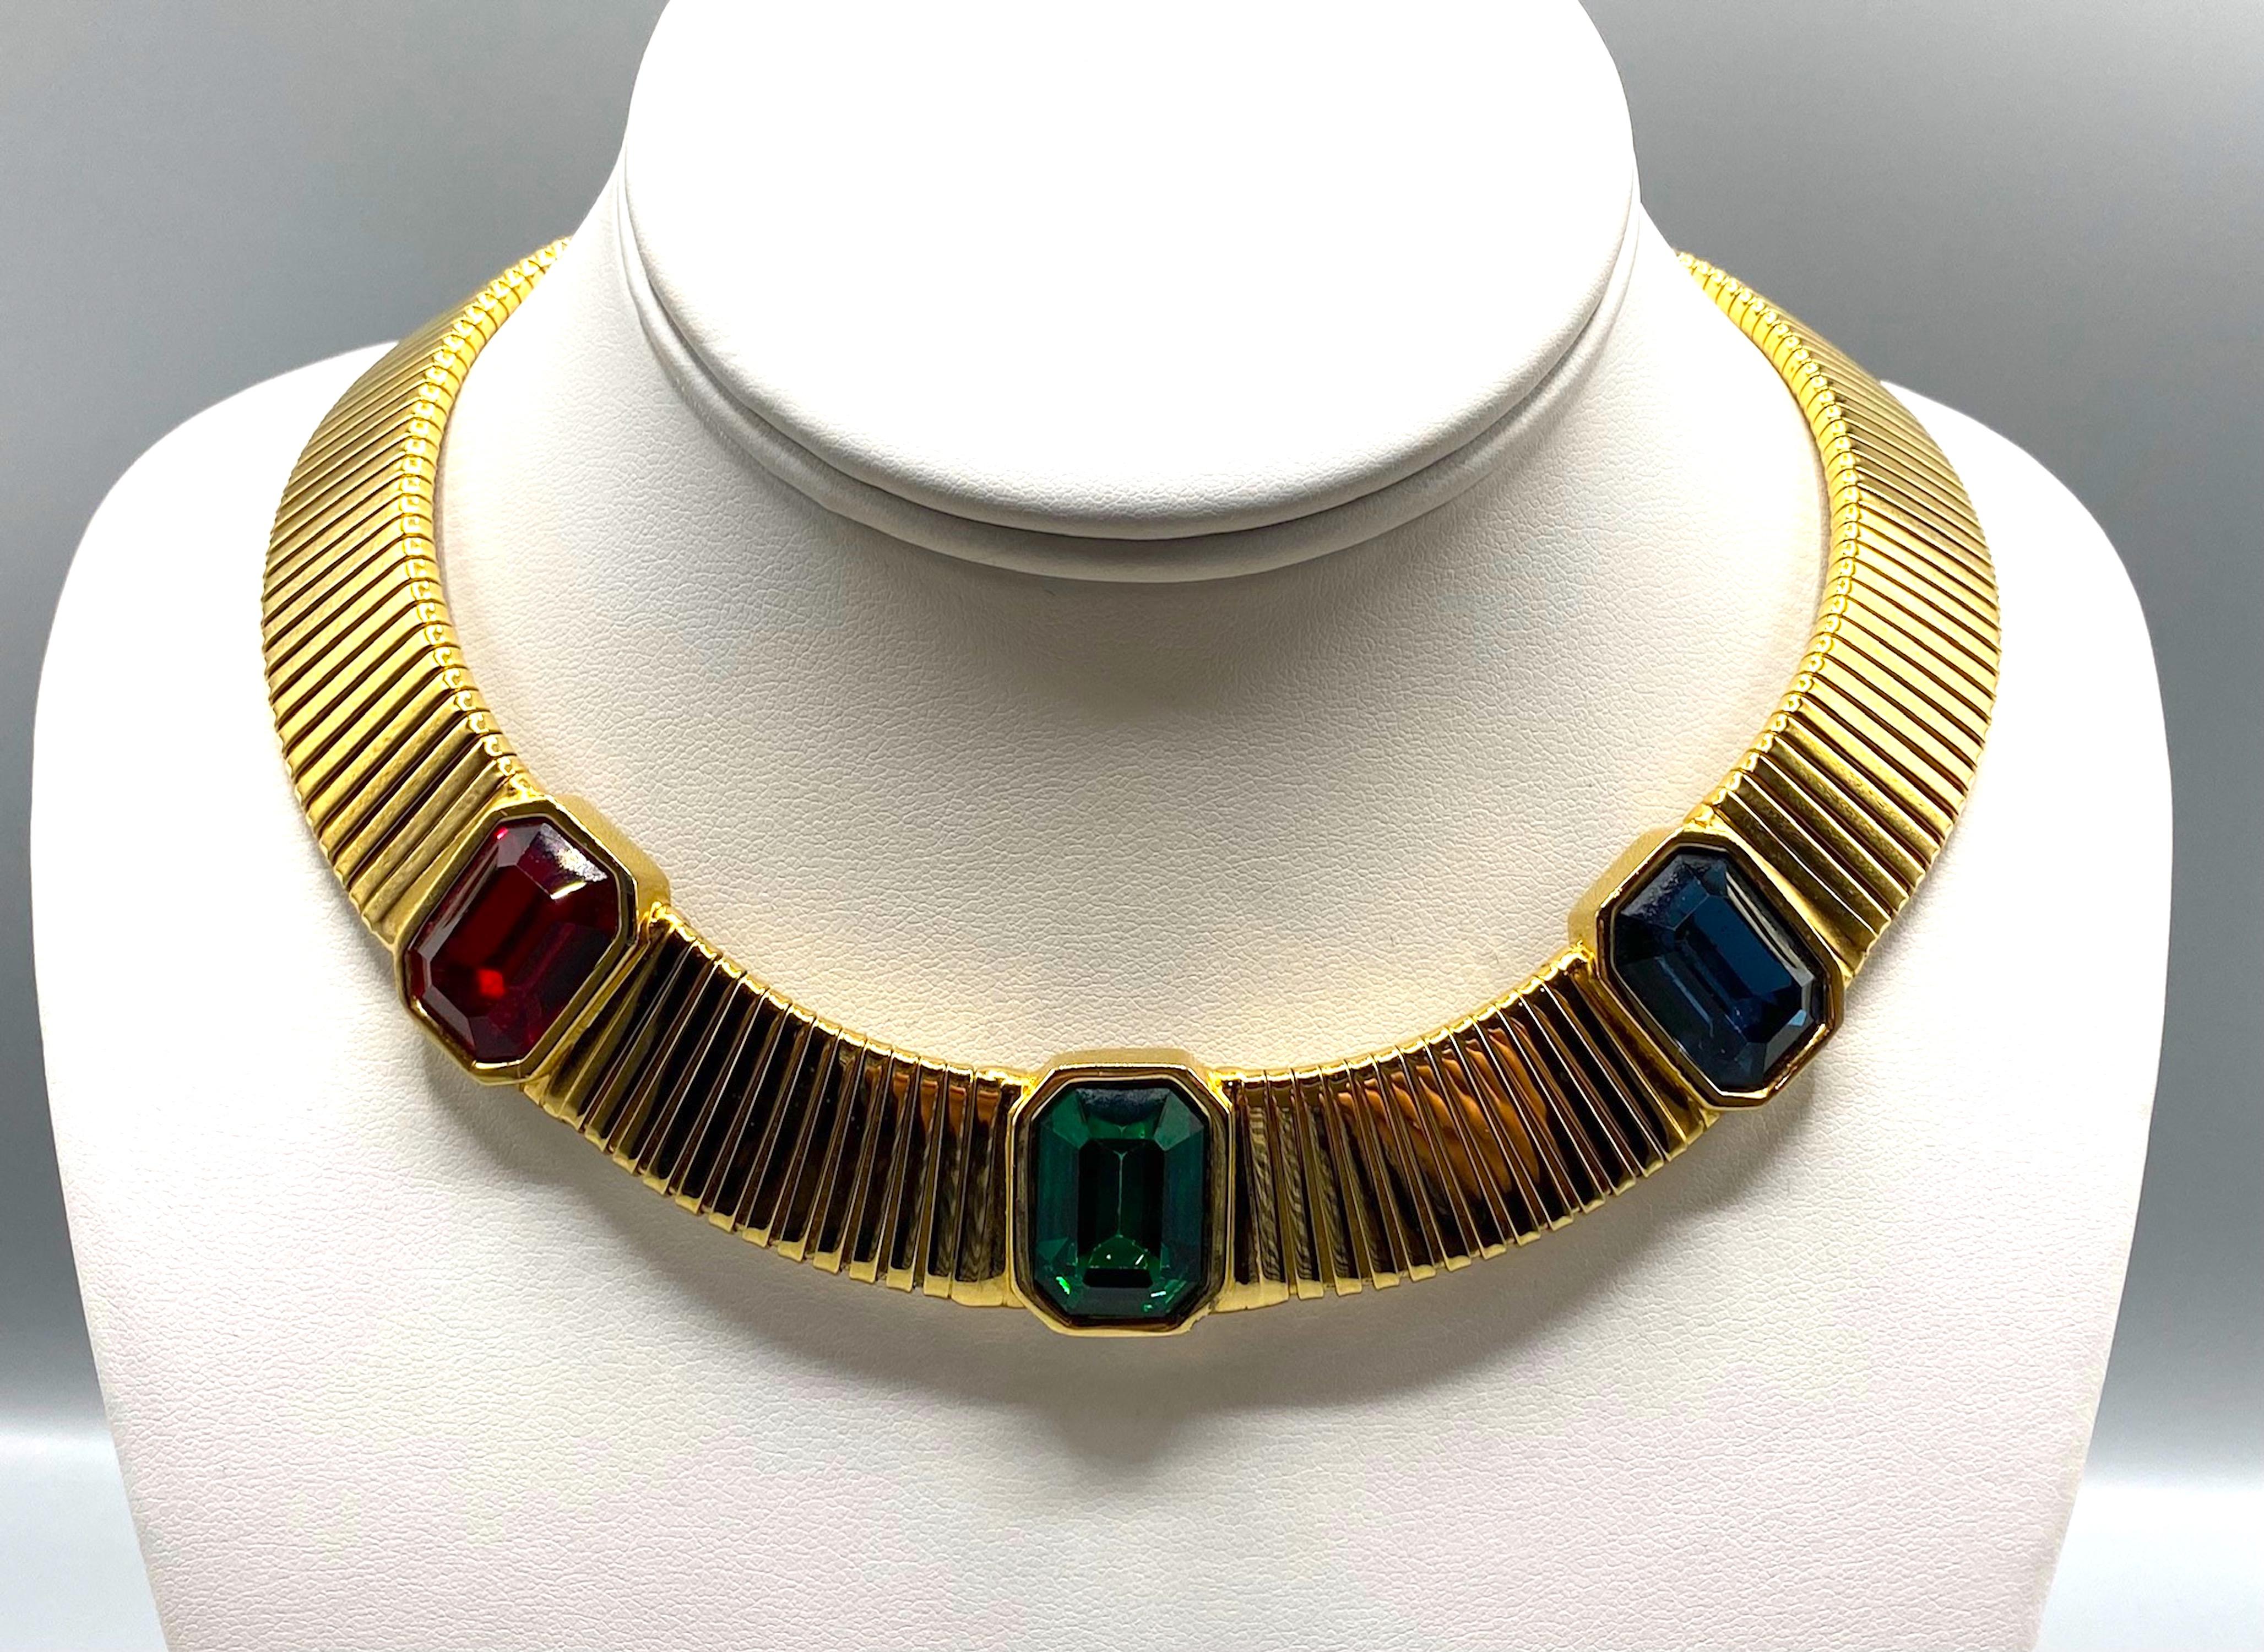 An absolutely stunning and finely executed  necklace by long time fashion jewelry company Ciner of New York. Over 125 years Ciner was a family run business and known for its superior quality of fashion jewelry all made in New York City. 
This is a